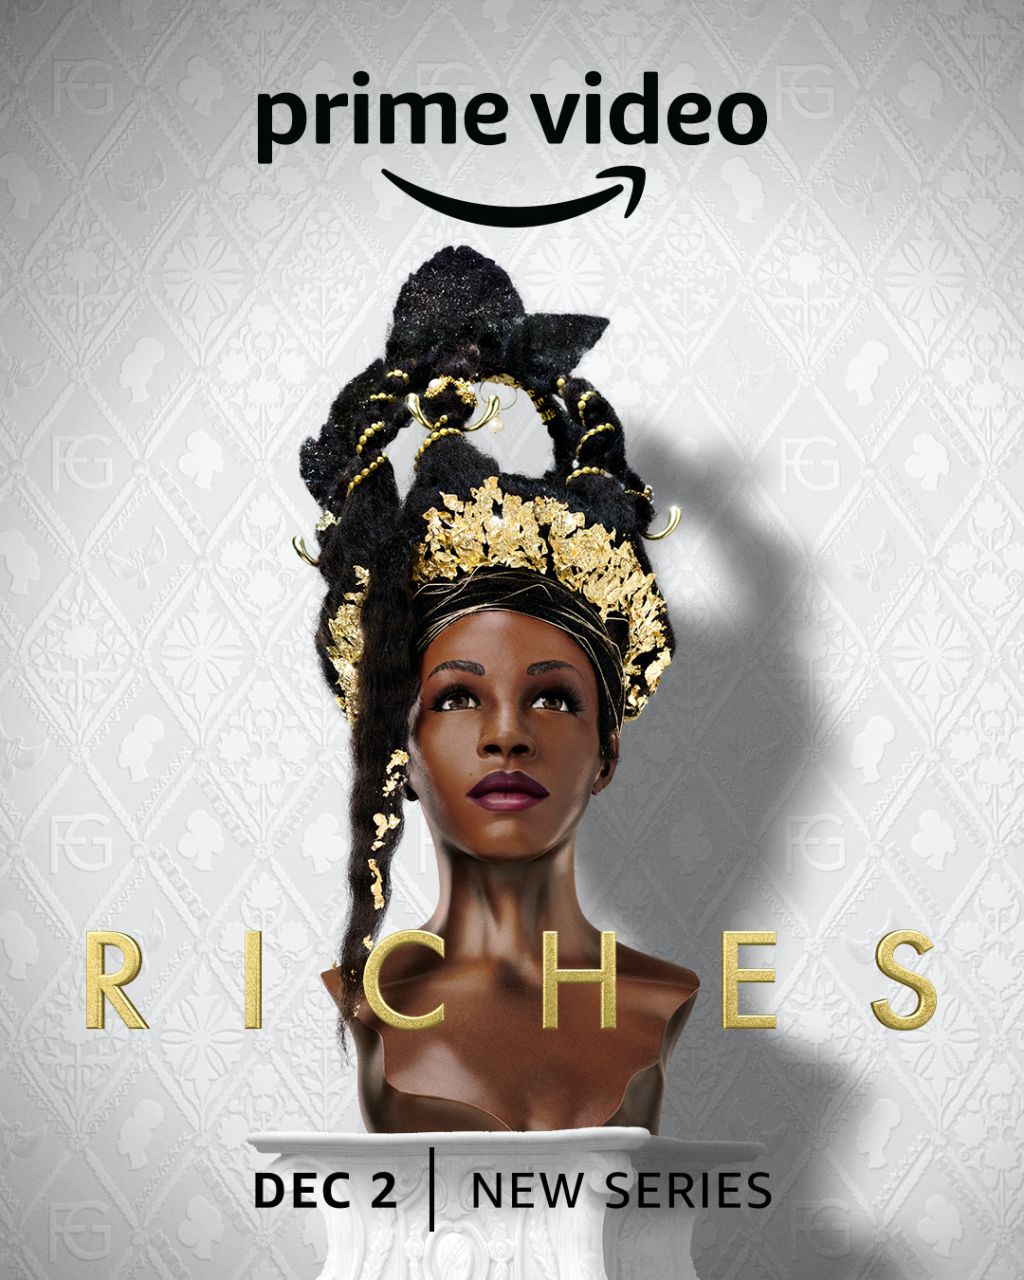 'Riches' key art and first look images